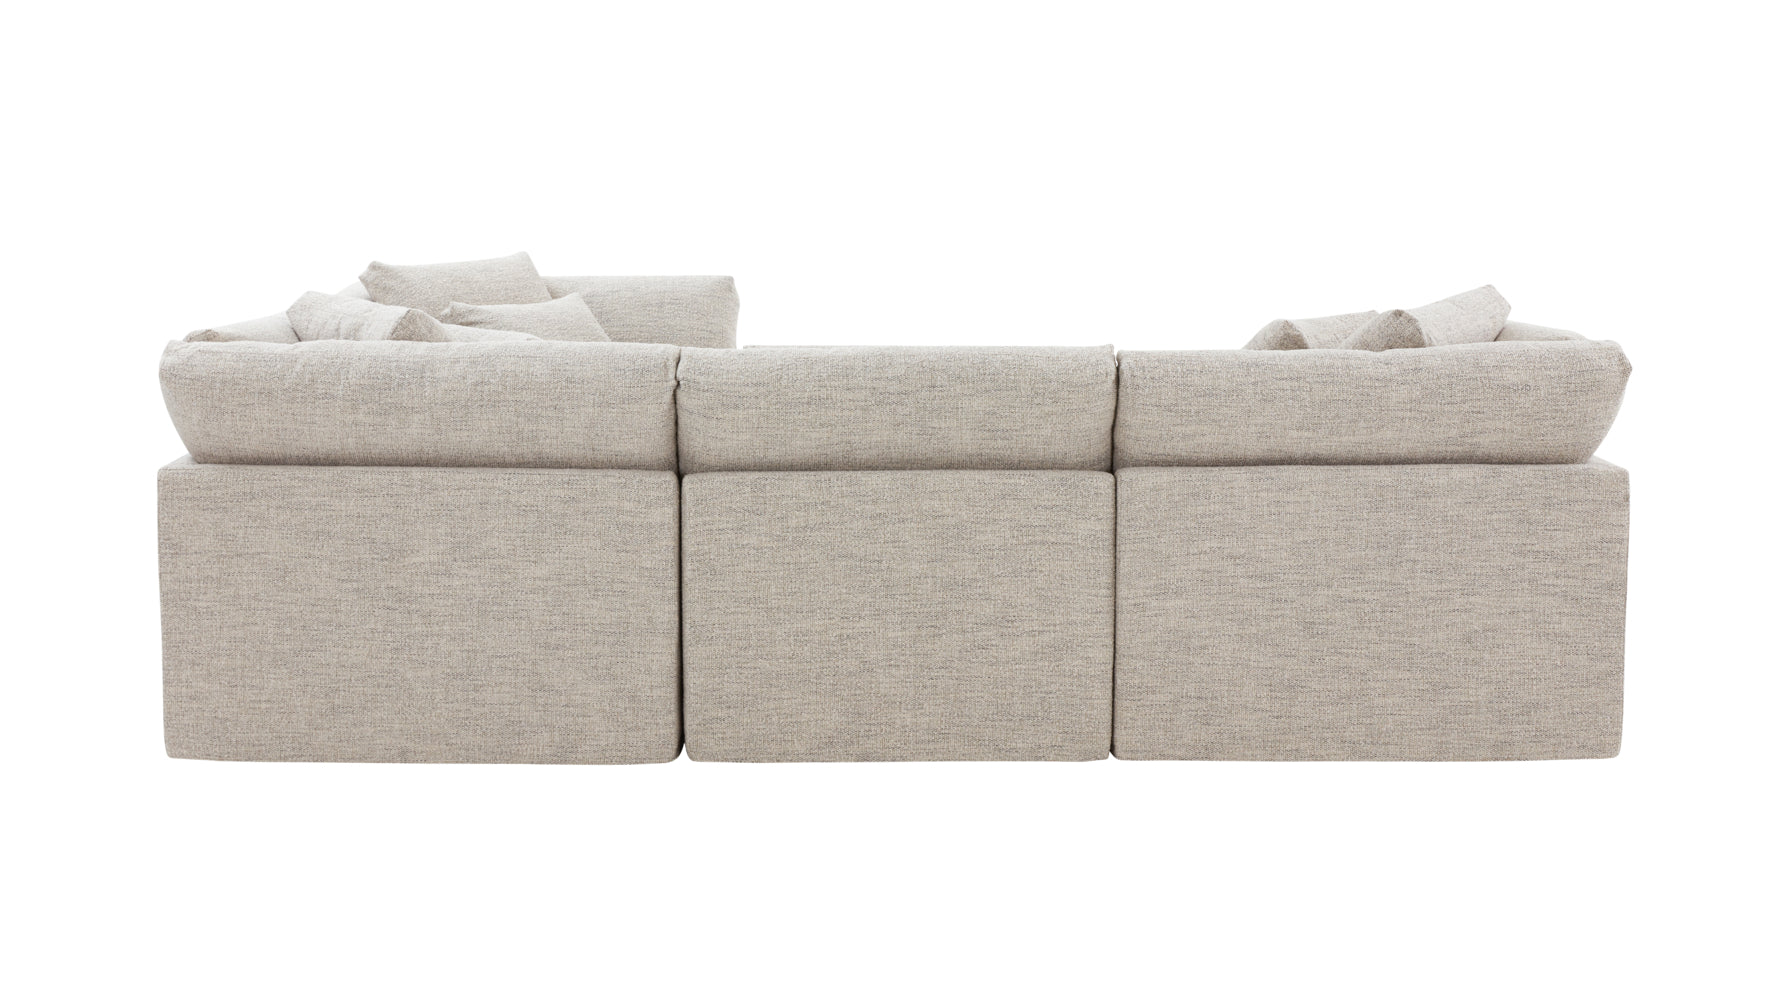 Get Together™ 4-Piece Modular Sectional Closed, Large, Oatmeal - Image 7